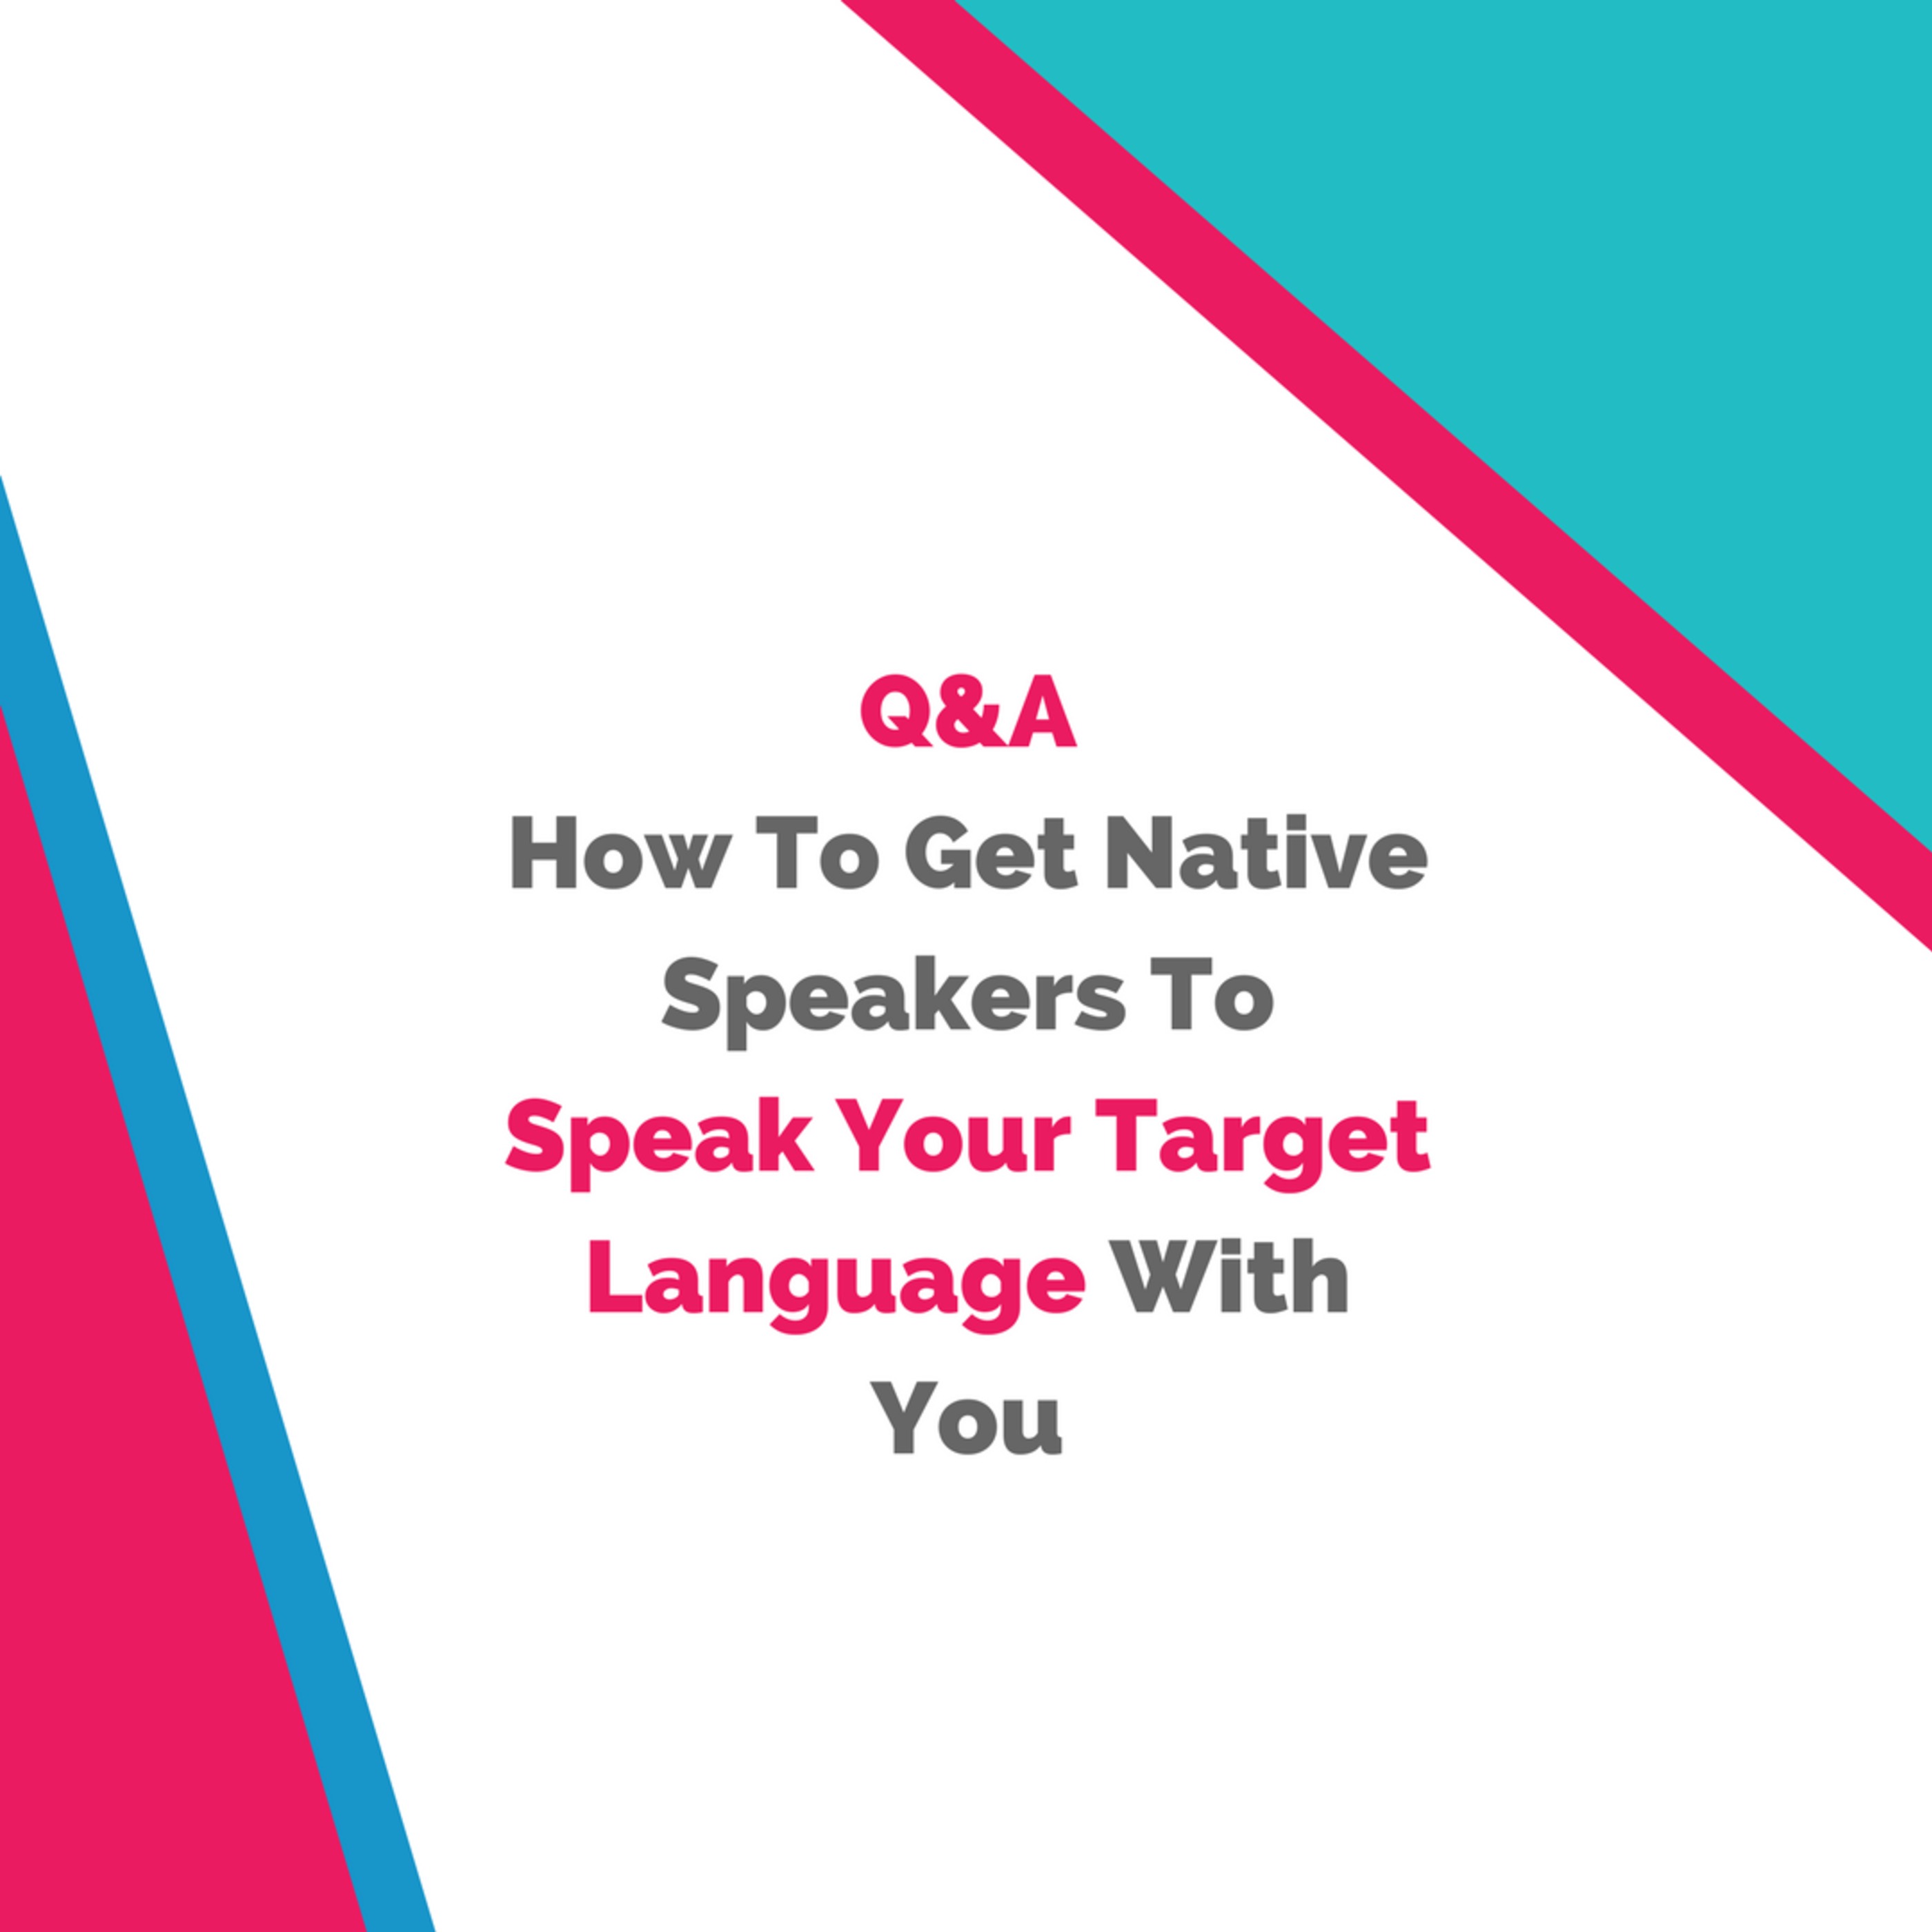 How To Get Native Speakers To Speak Your Target Language